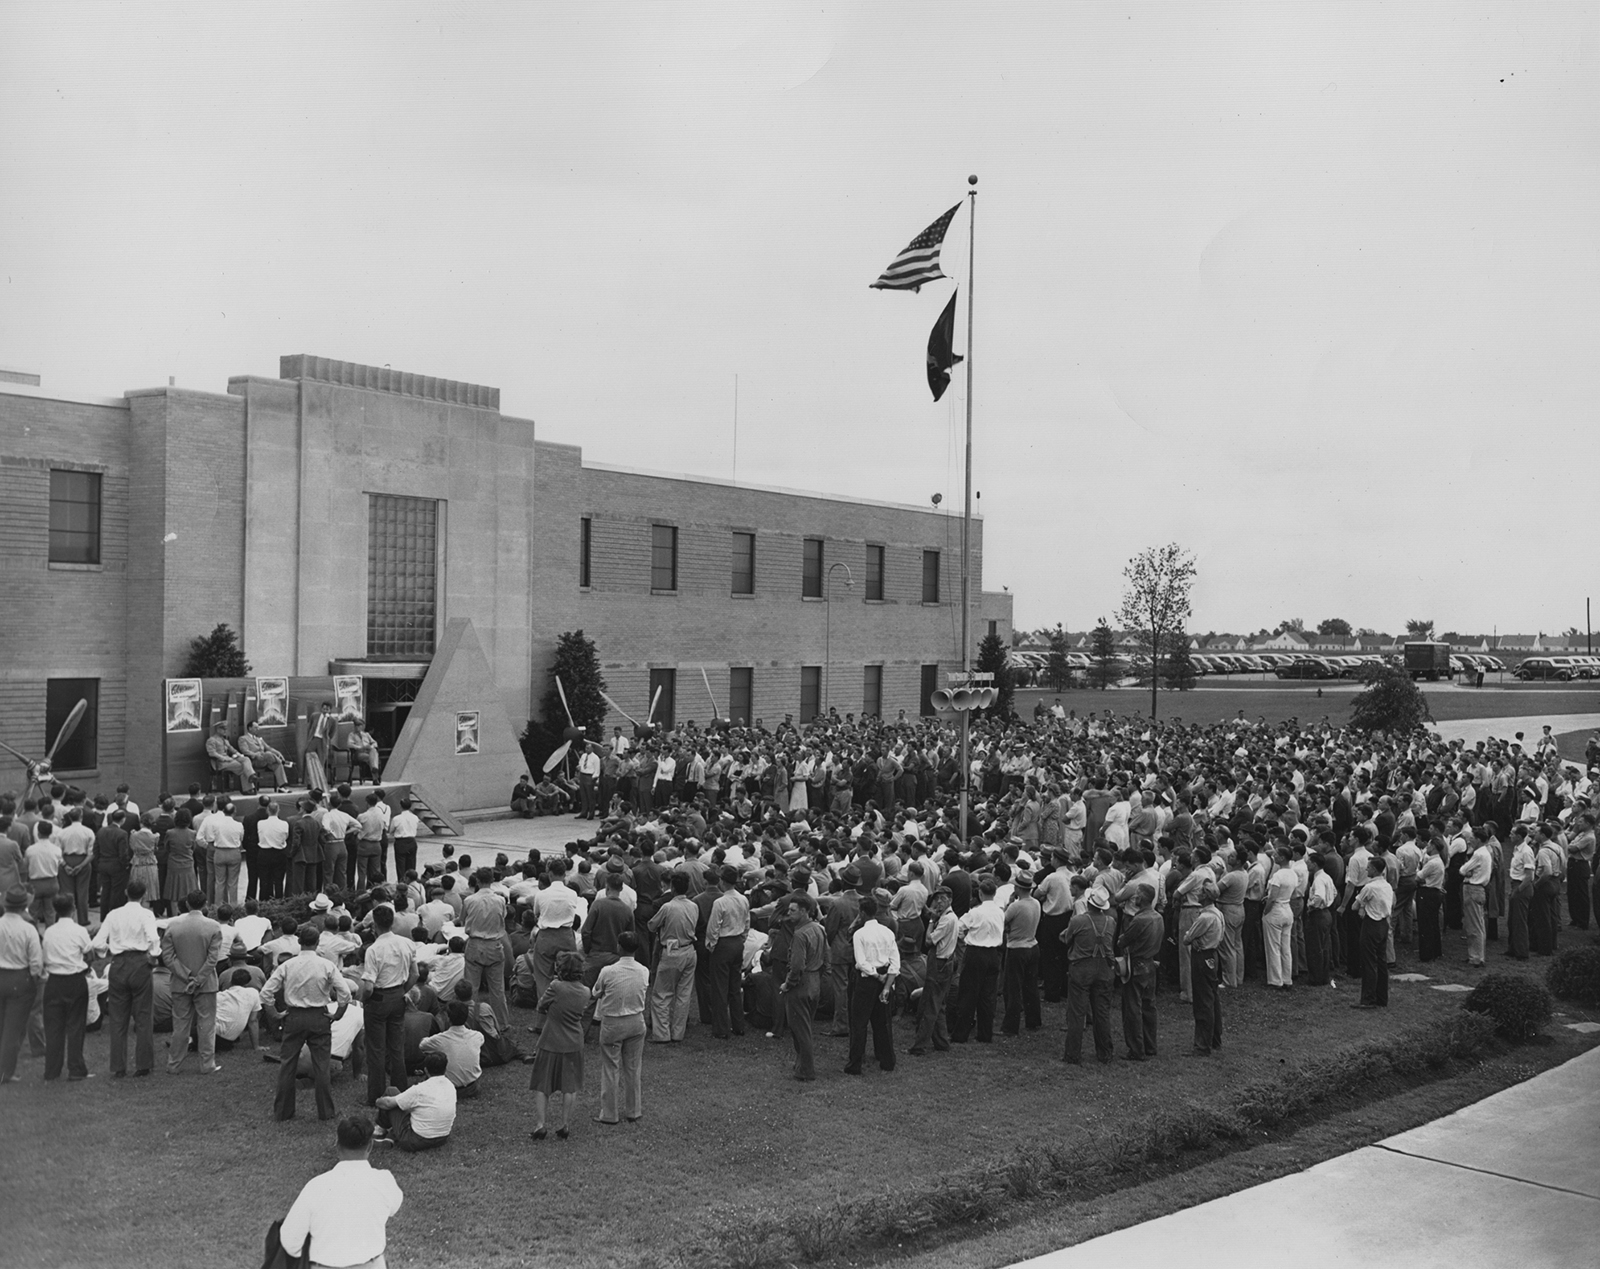 A crowd gathered outside Aeroproducts, undated (Photo by GM Aeroproducts Division, MS-305, Box 3a, Folder 9)